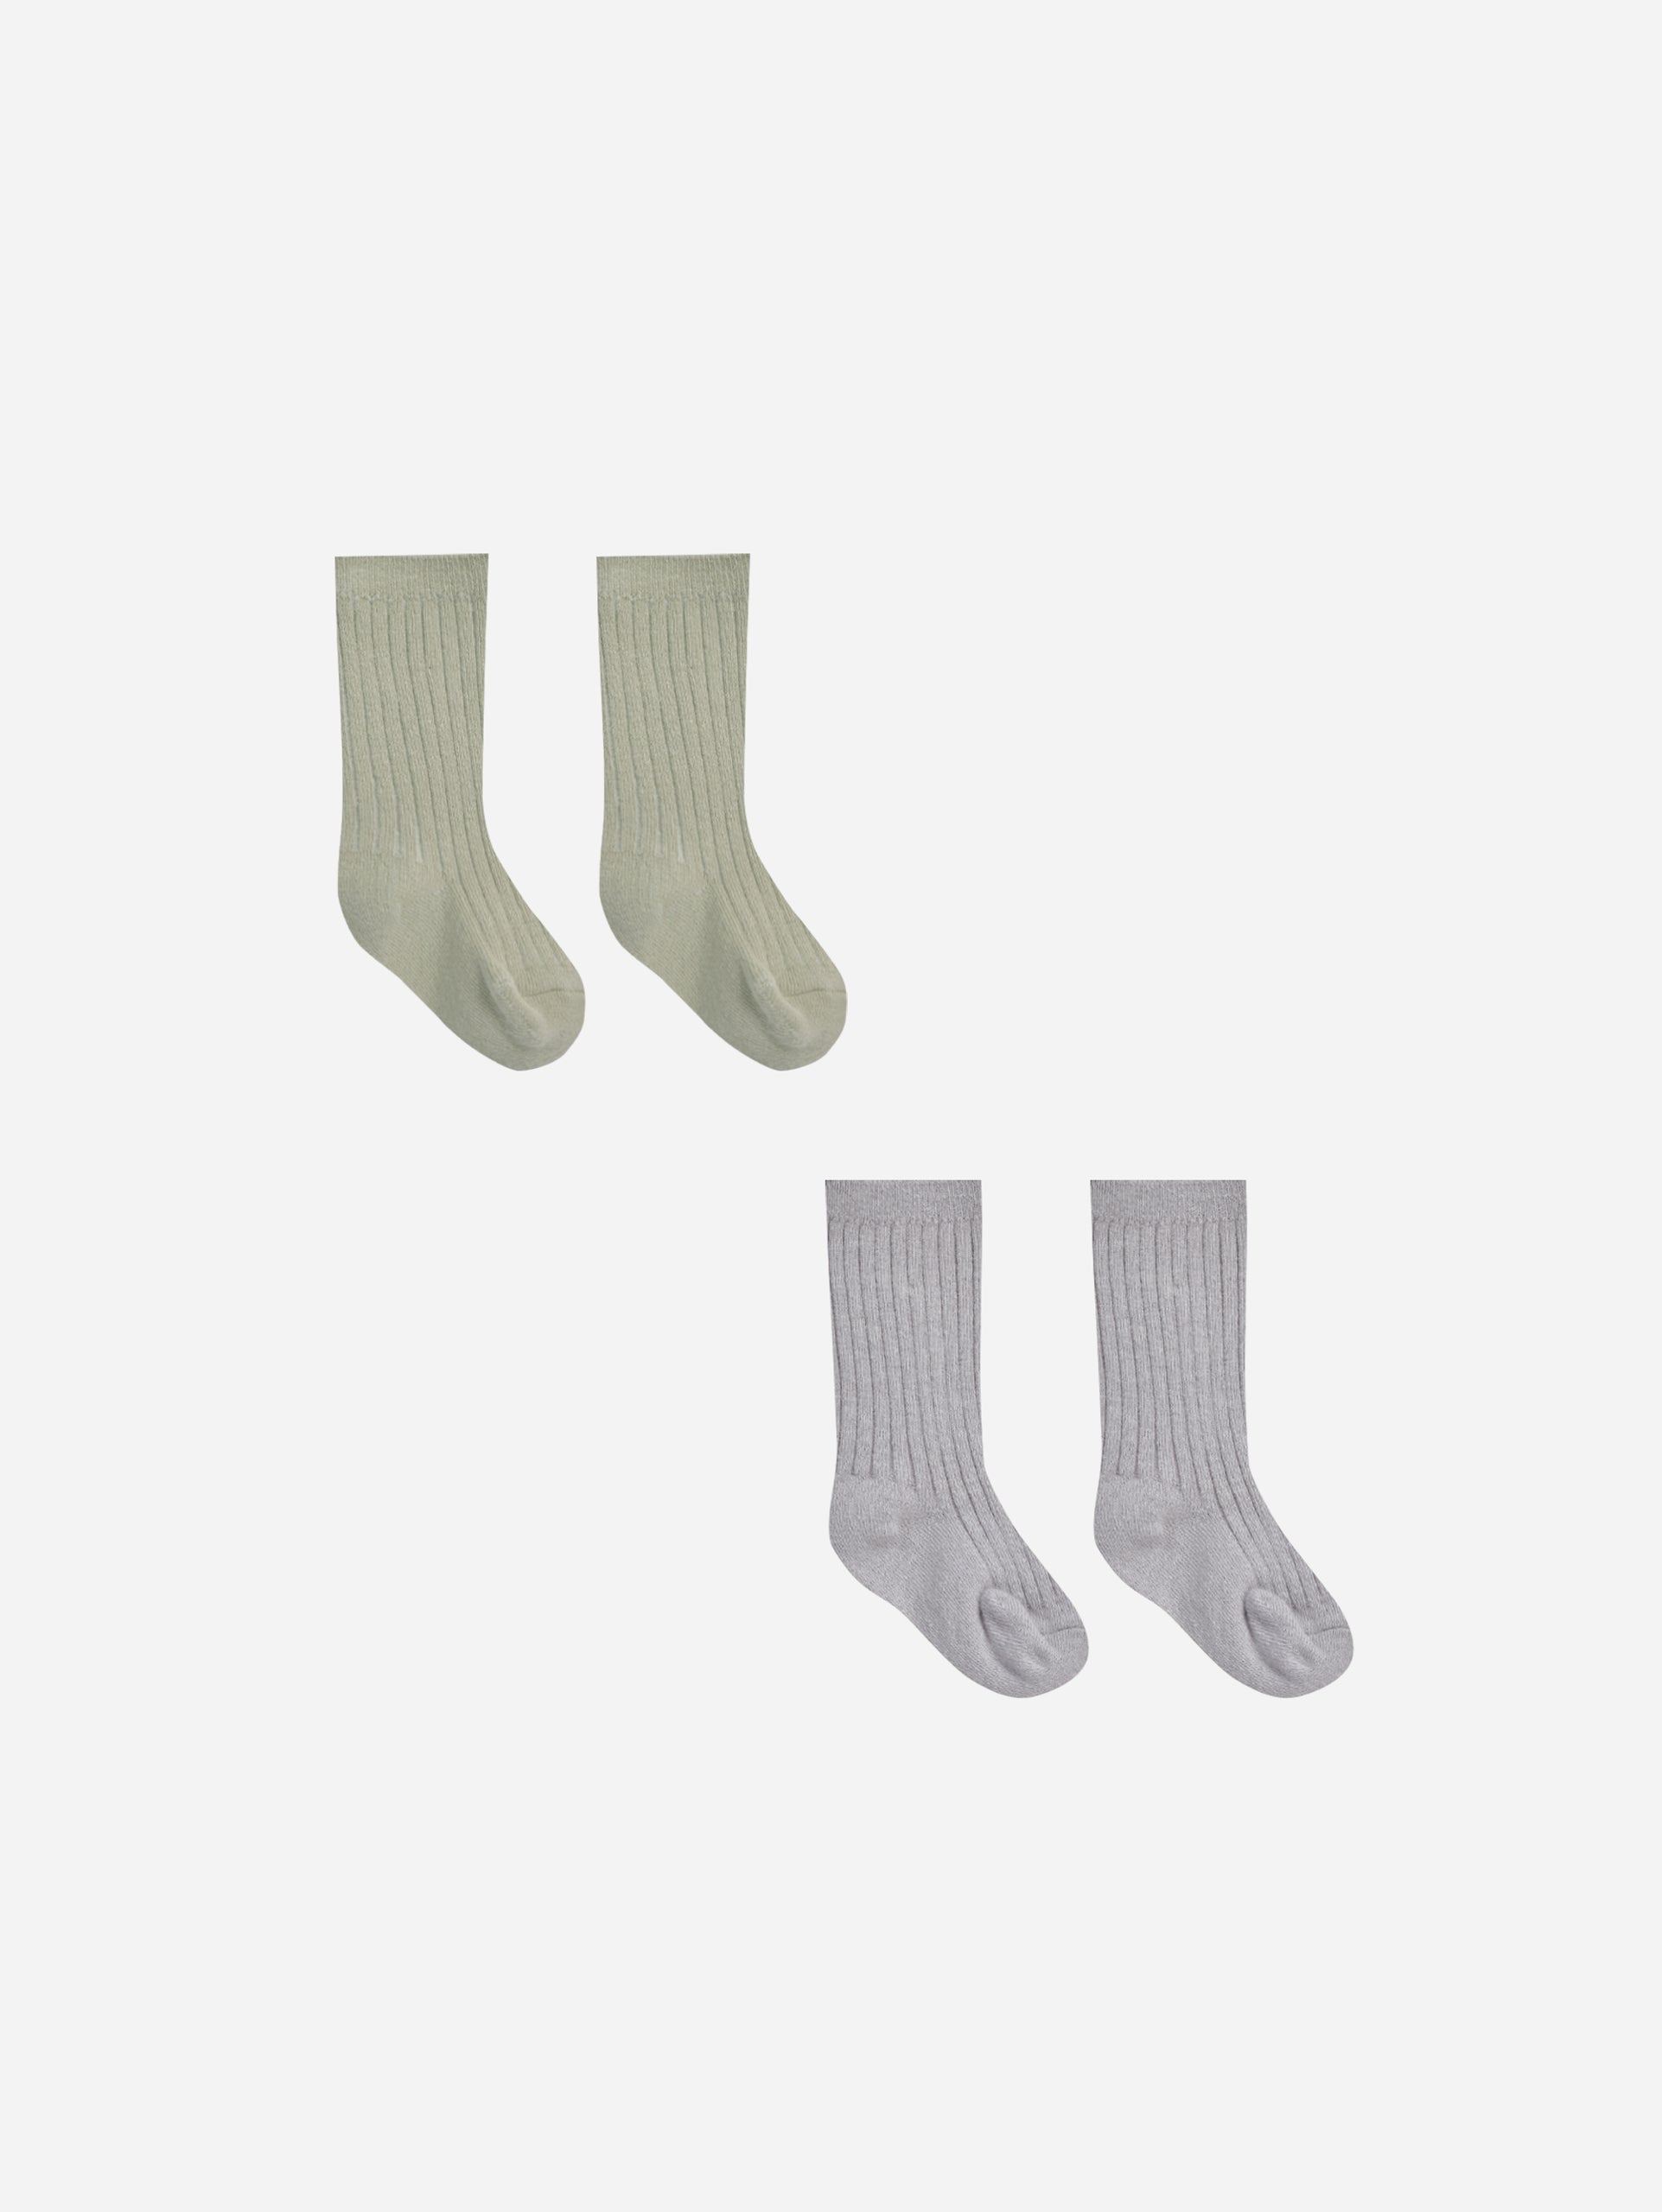 Socks Set || Sage, Periwinkle - Rylee + Cru | Kids Clothes | Trendy Baby Clothes | Modern Infant Outfits |